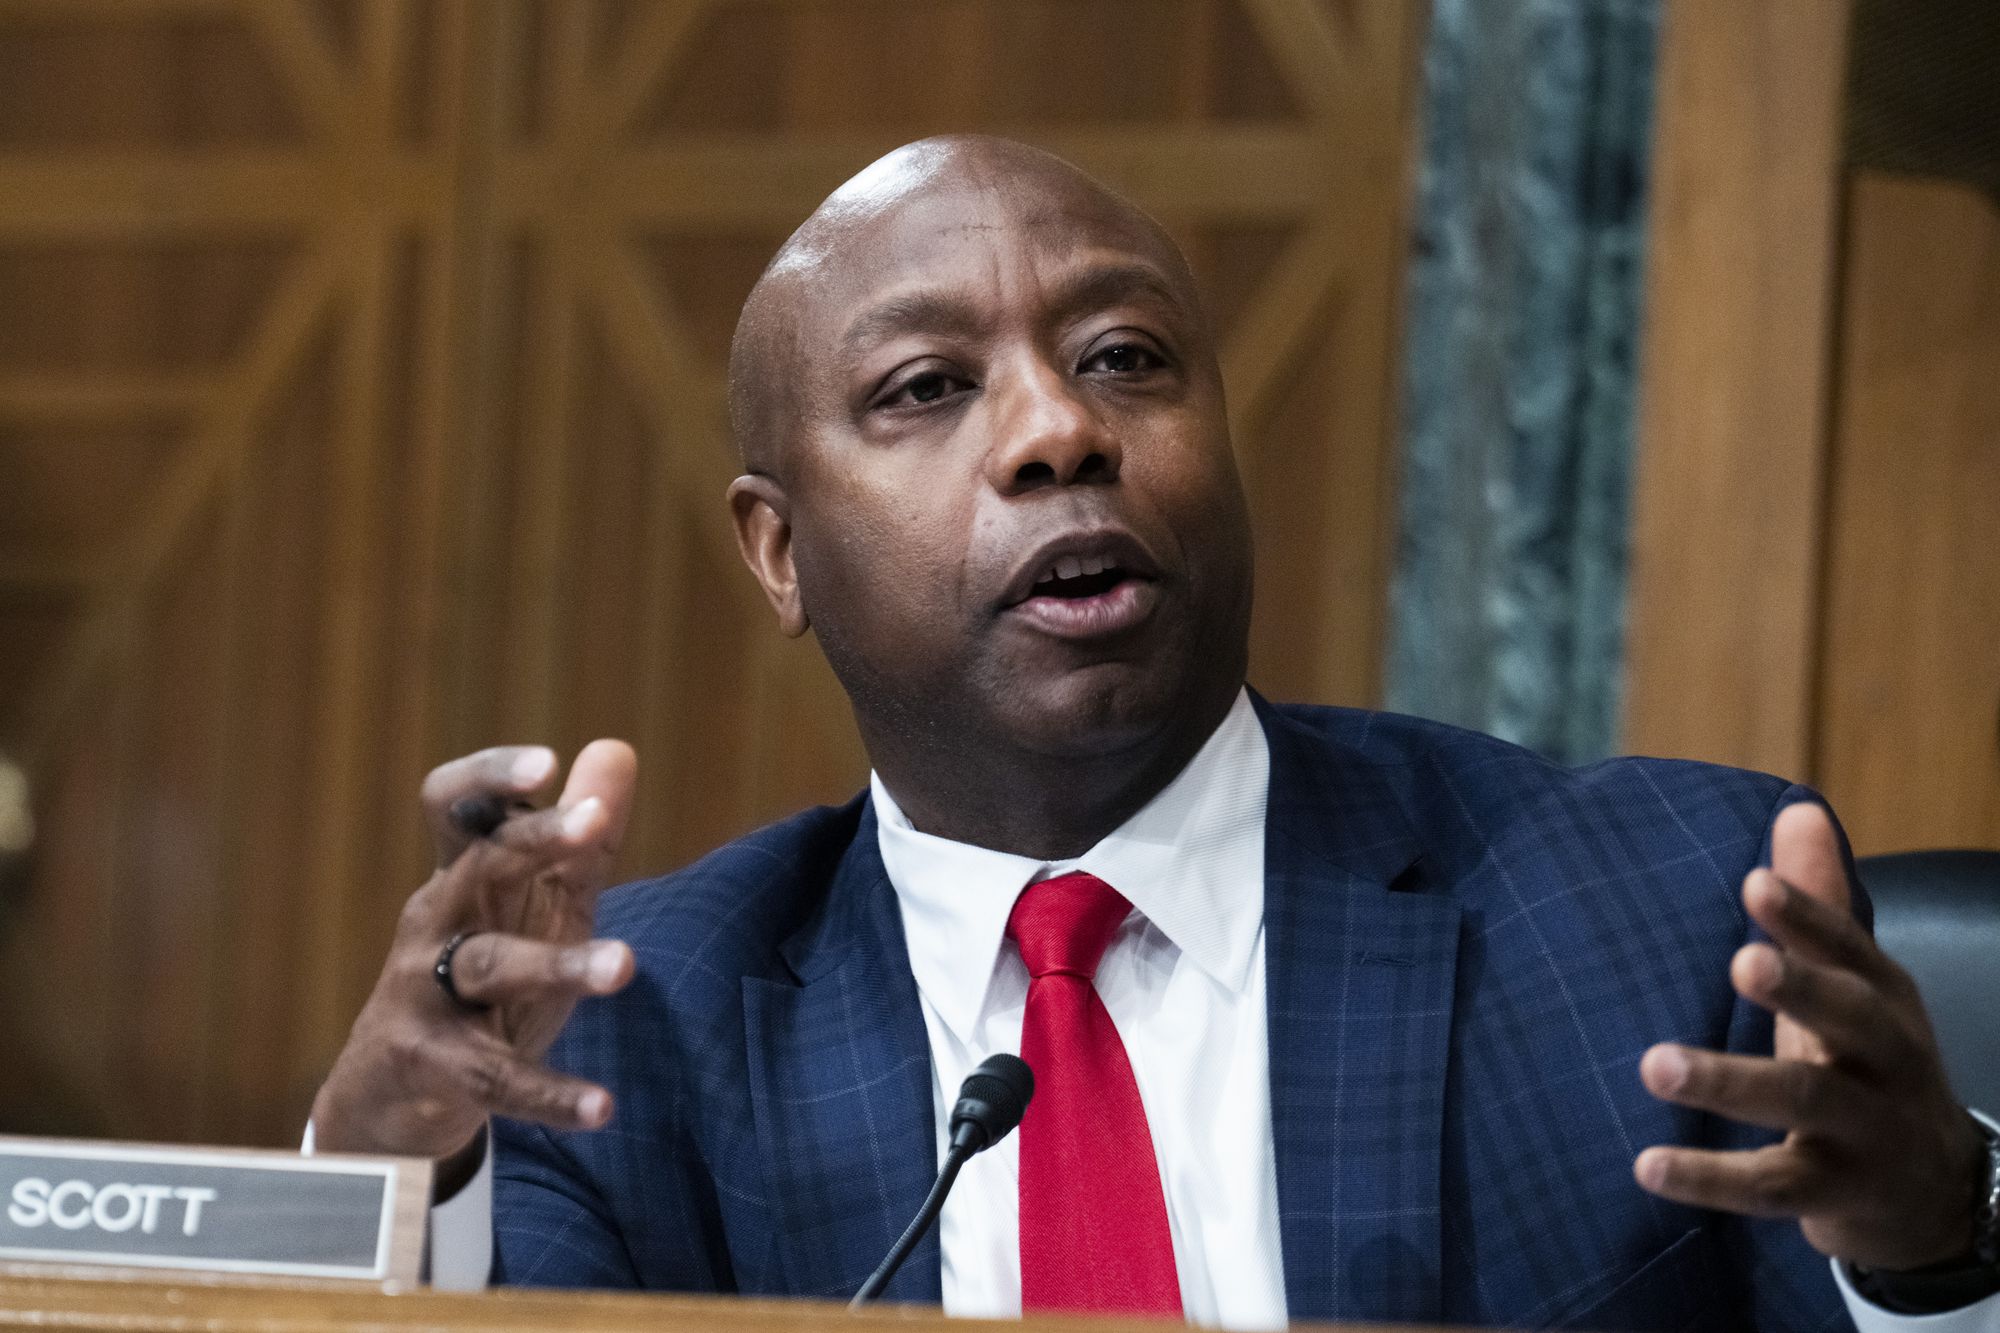 Sen. Tim Scott, R-S.C., is a ranking member on the committee on banking, housing and urban affairs, and also serves on several other committees including foreign relations and small business and entrepreneurship. File Pool Photo by Tom Williams/UPI